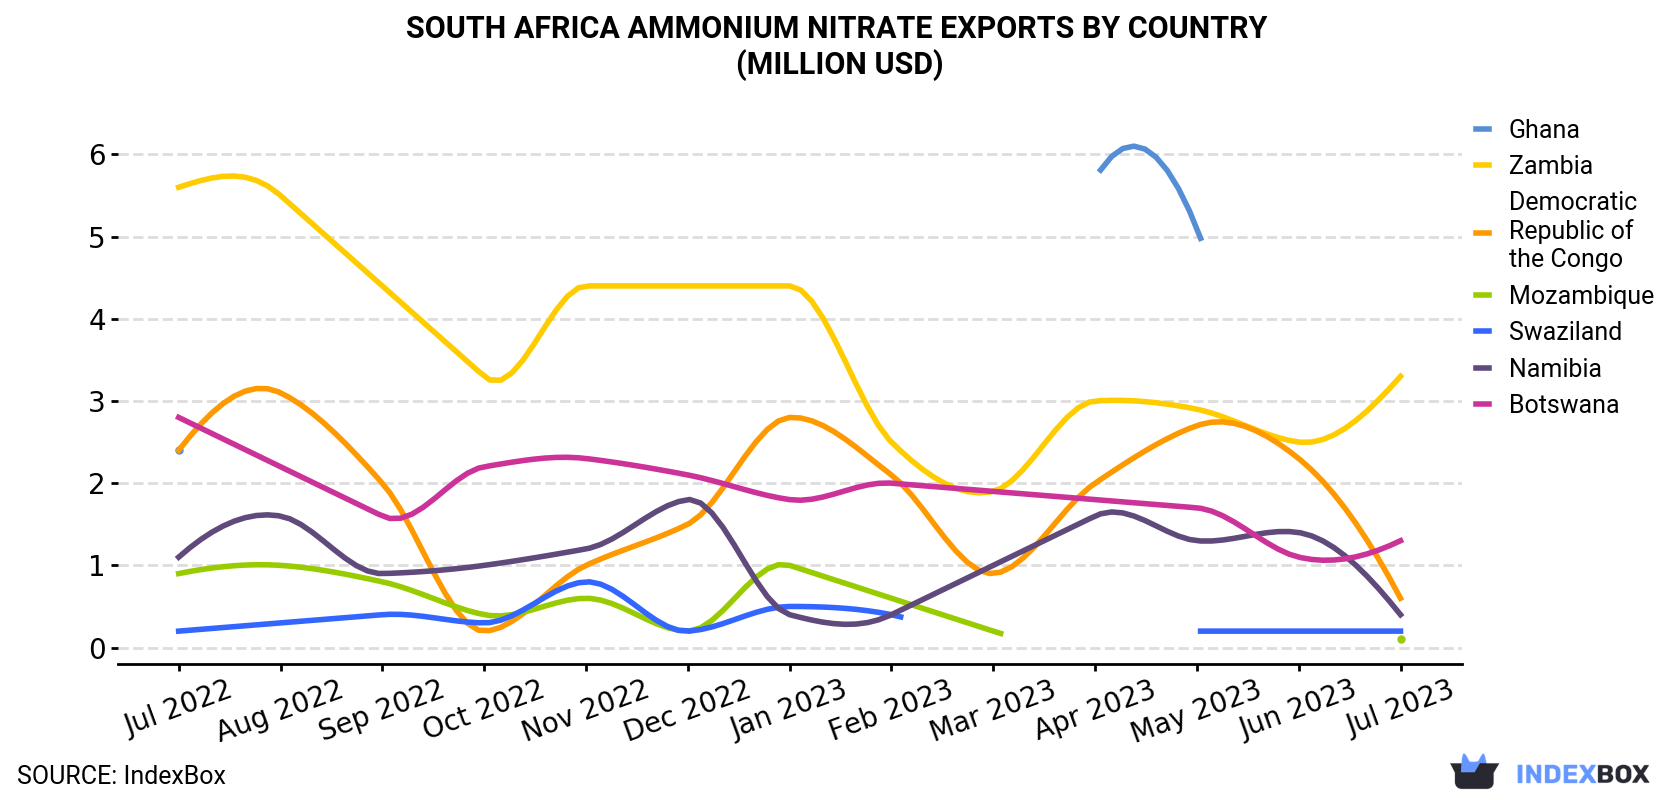 South Africa Ammonium Nitrate Exports By Country (Million USD)